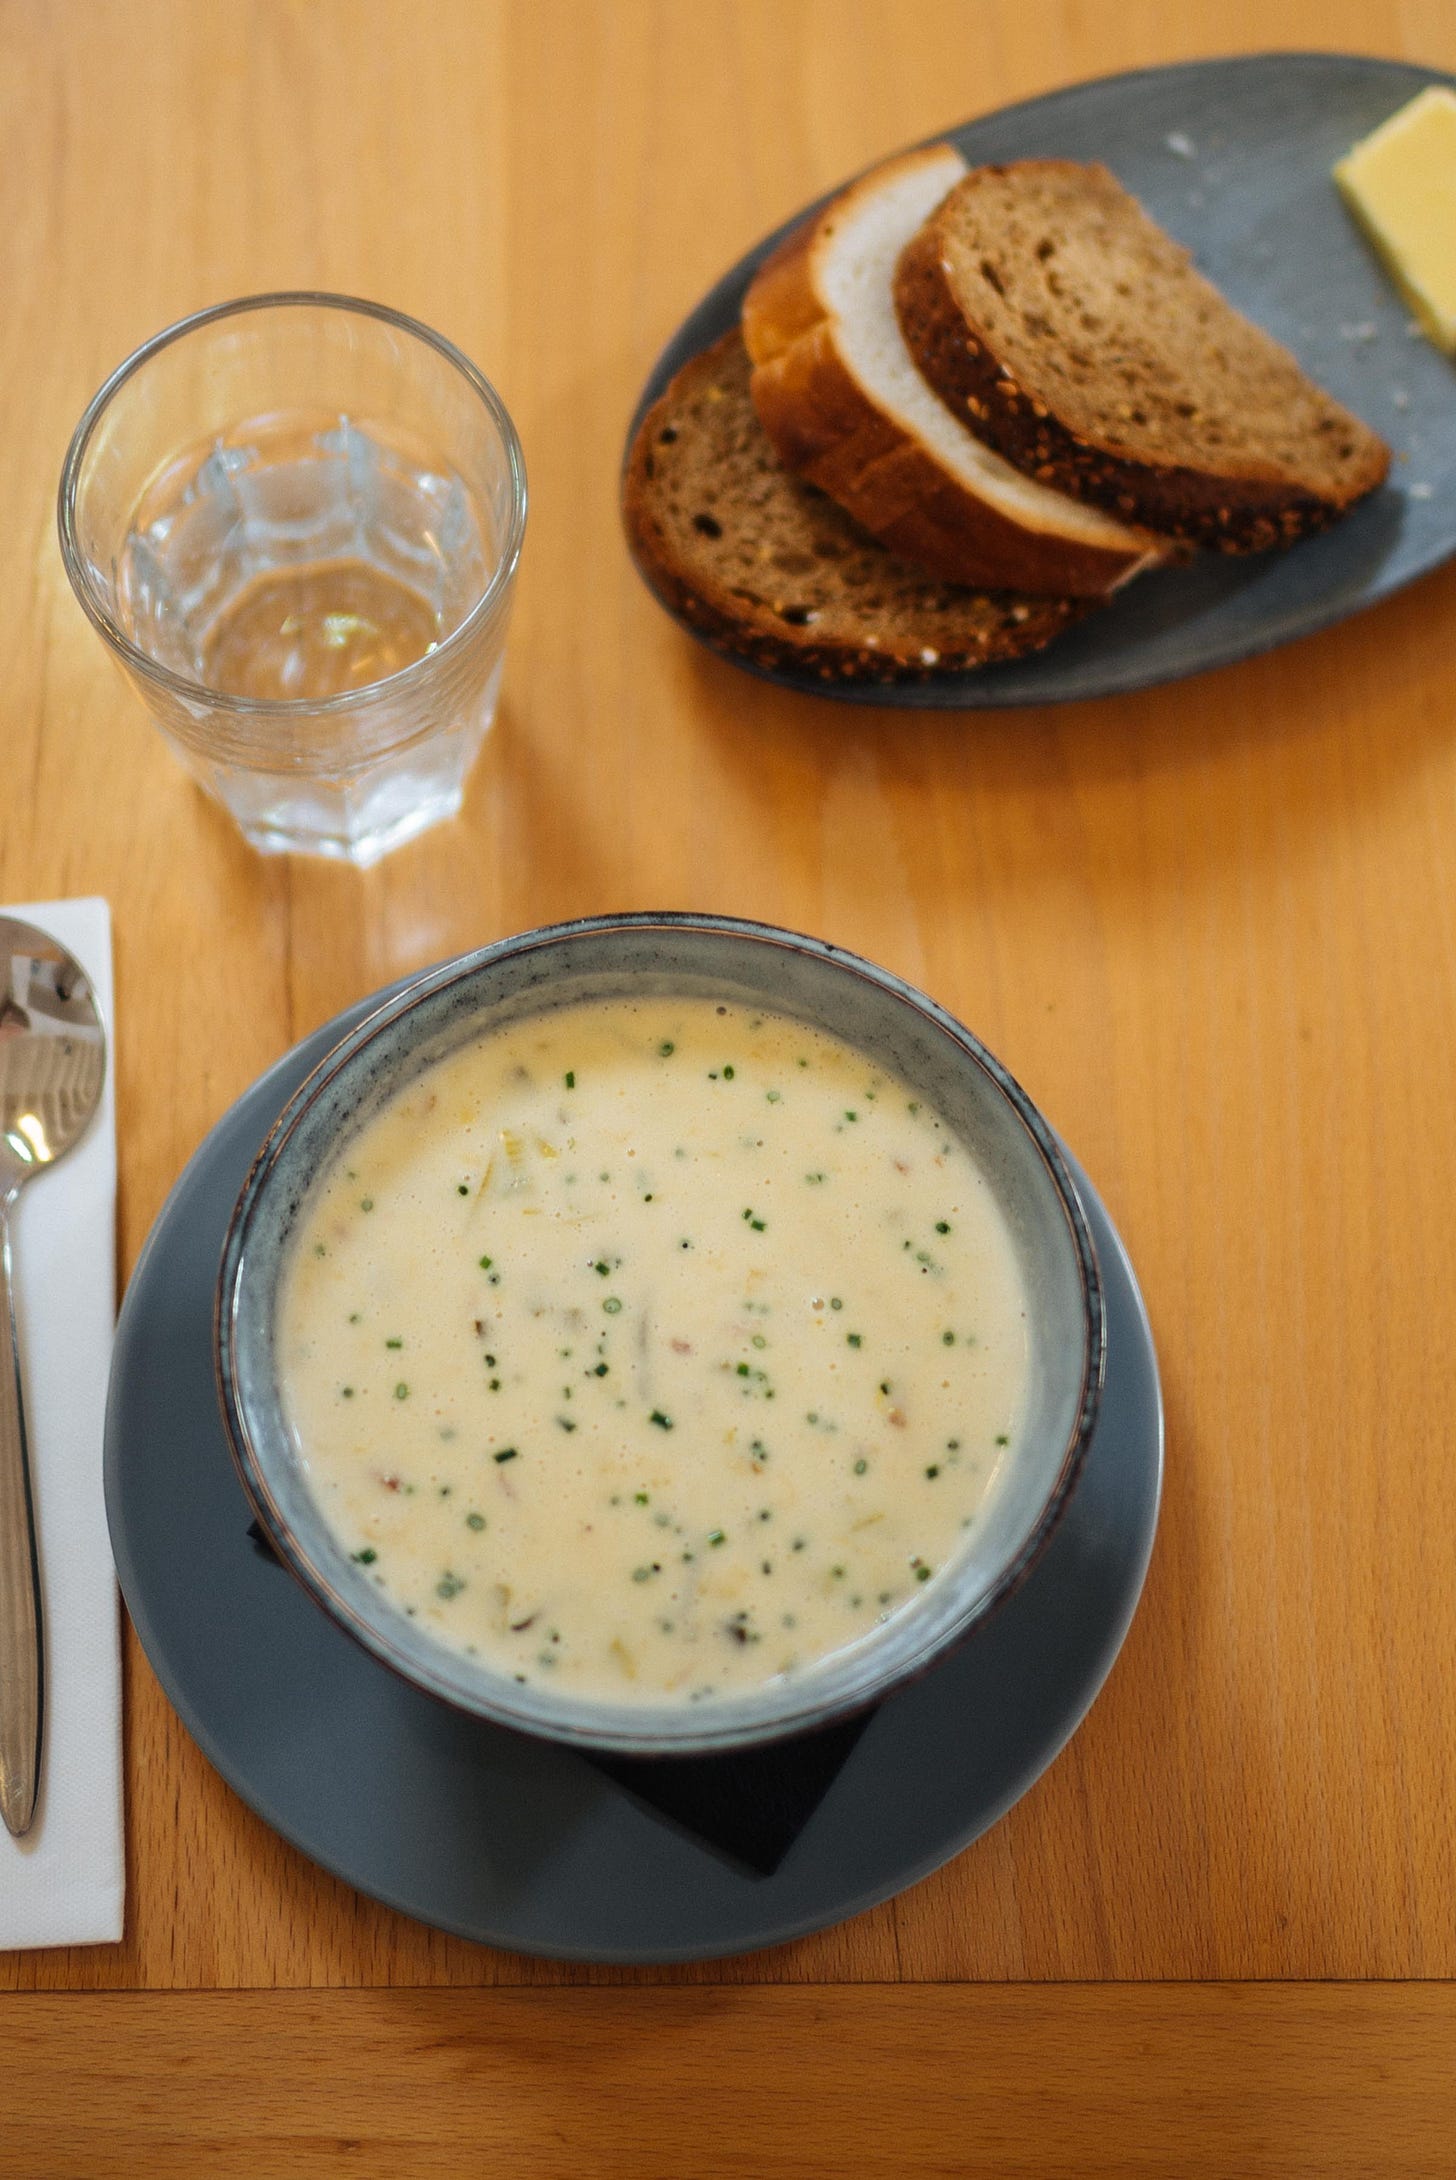 Cullen Sink in Scotland a smoked fish soup